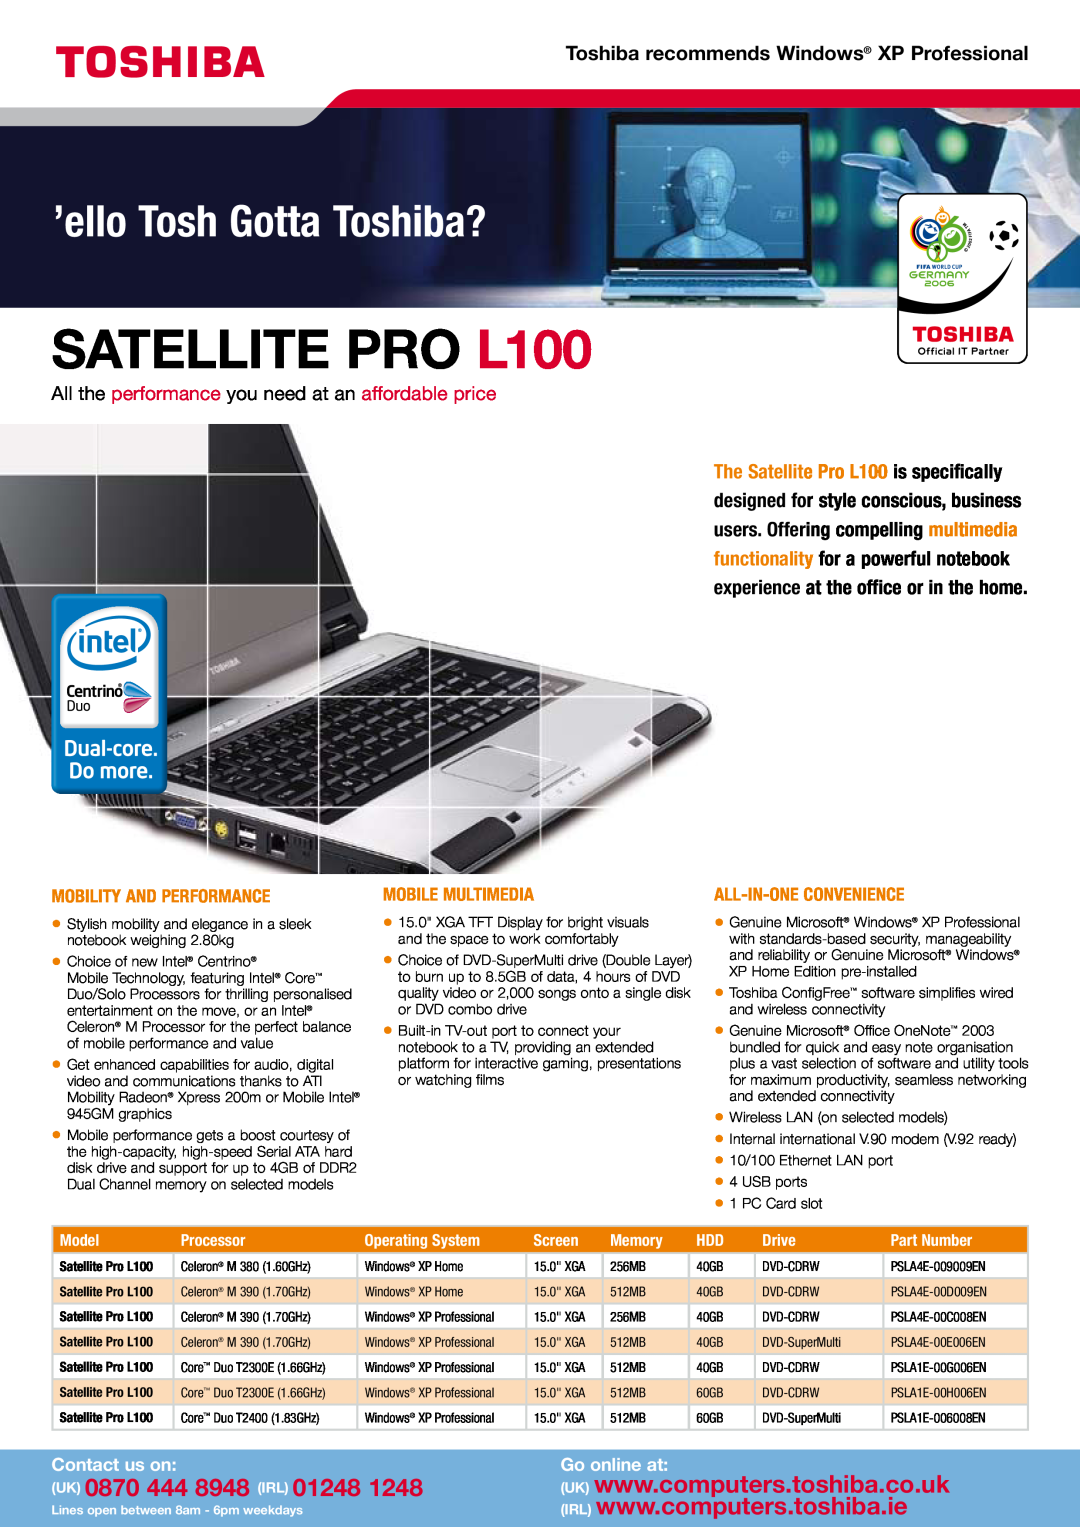 Toshiba manual SATELLITE PRO L100, UK 0870 444 8948 IRL 01248, Toshiba recommends Windows XP Professional, Go online at 